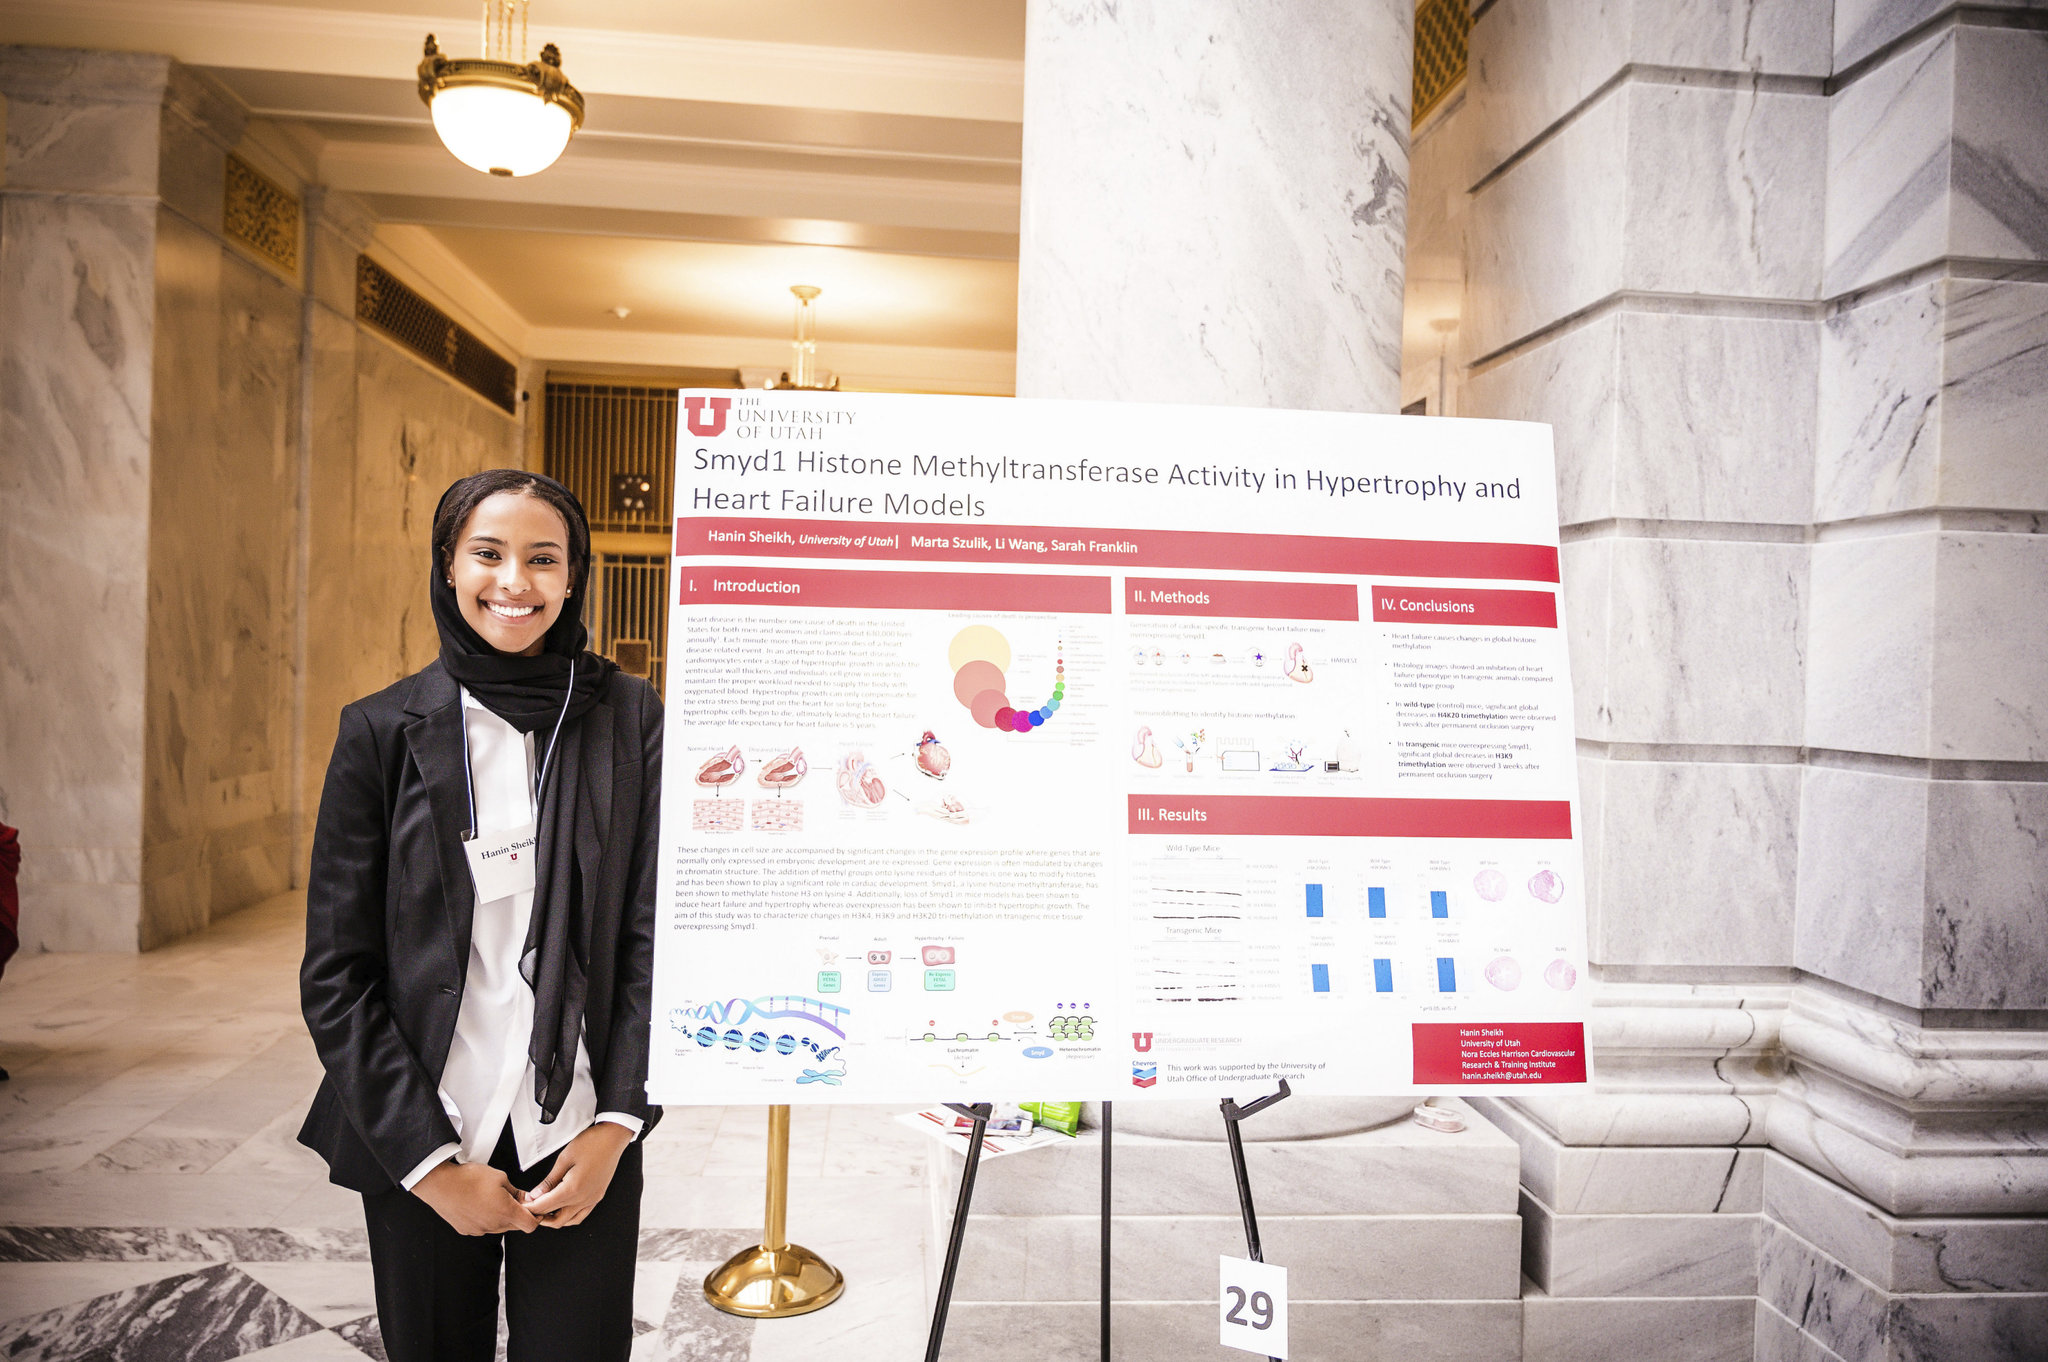 Hanin Sheikh was chosen to represent the University of Utah and CVRTI and showcase her research for Utah lawmakers and the general public